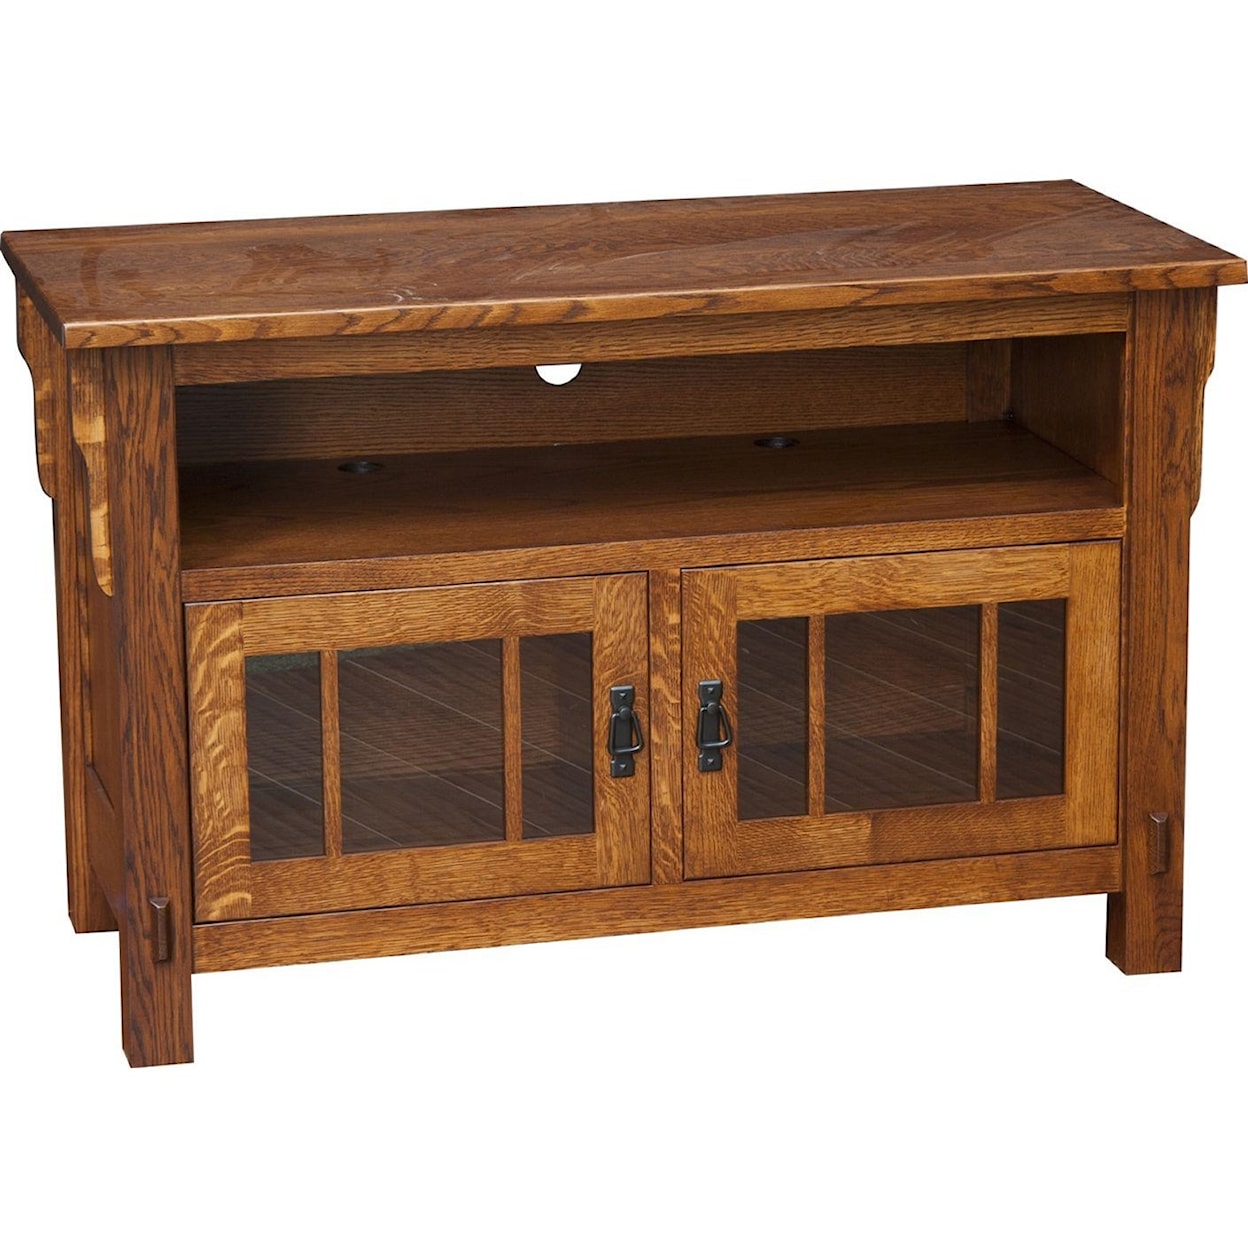 Amish Impressions by Fusion Designs Medallion Medallion Small TV Cabinet